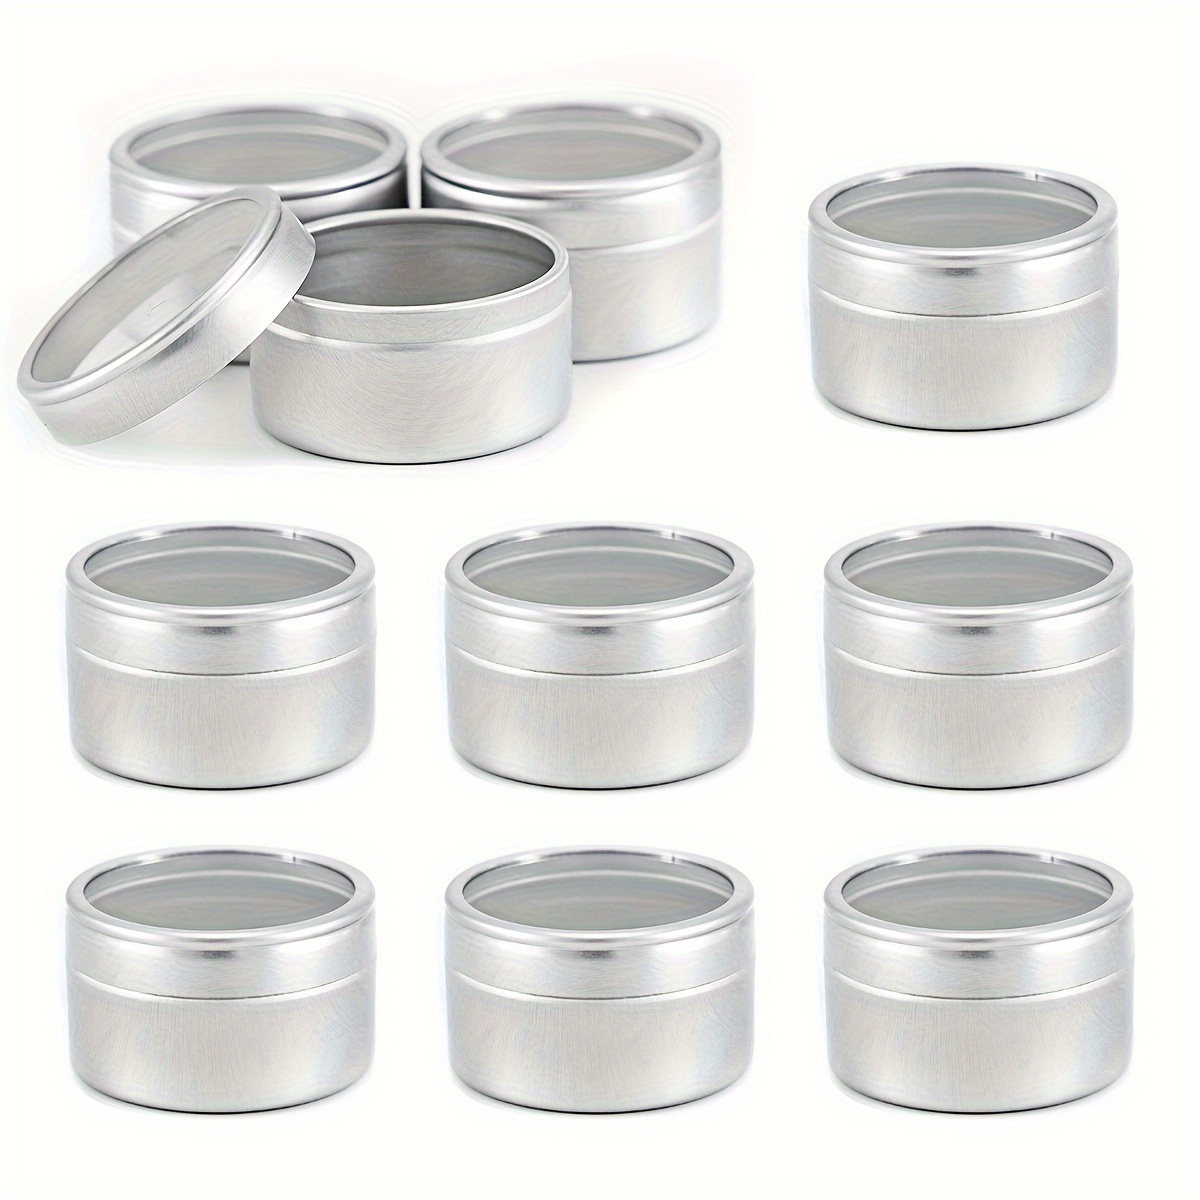 4 Ounce Aluminum Cans 120 mL Screw Lid Metal Storage Tins